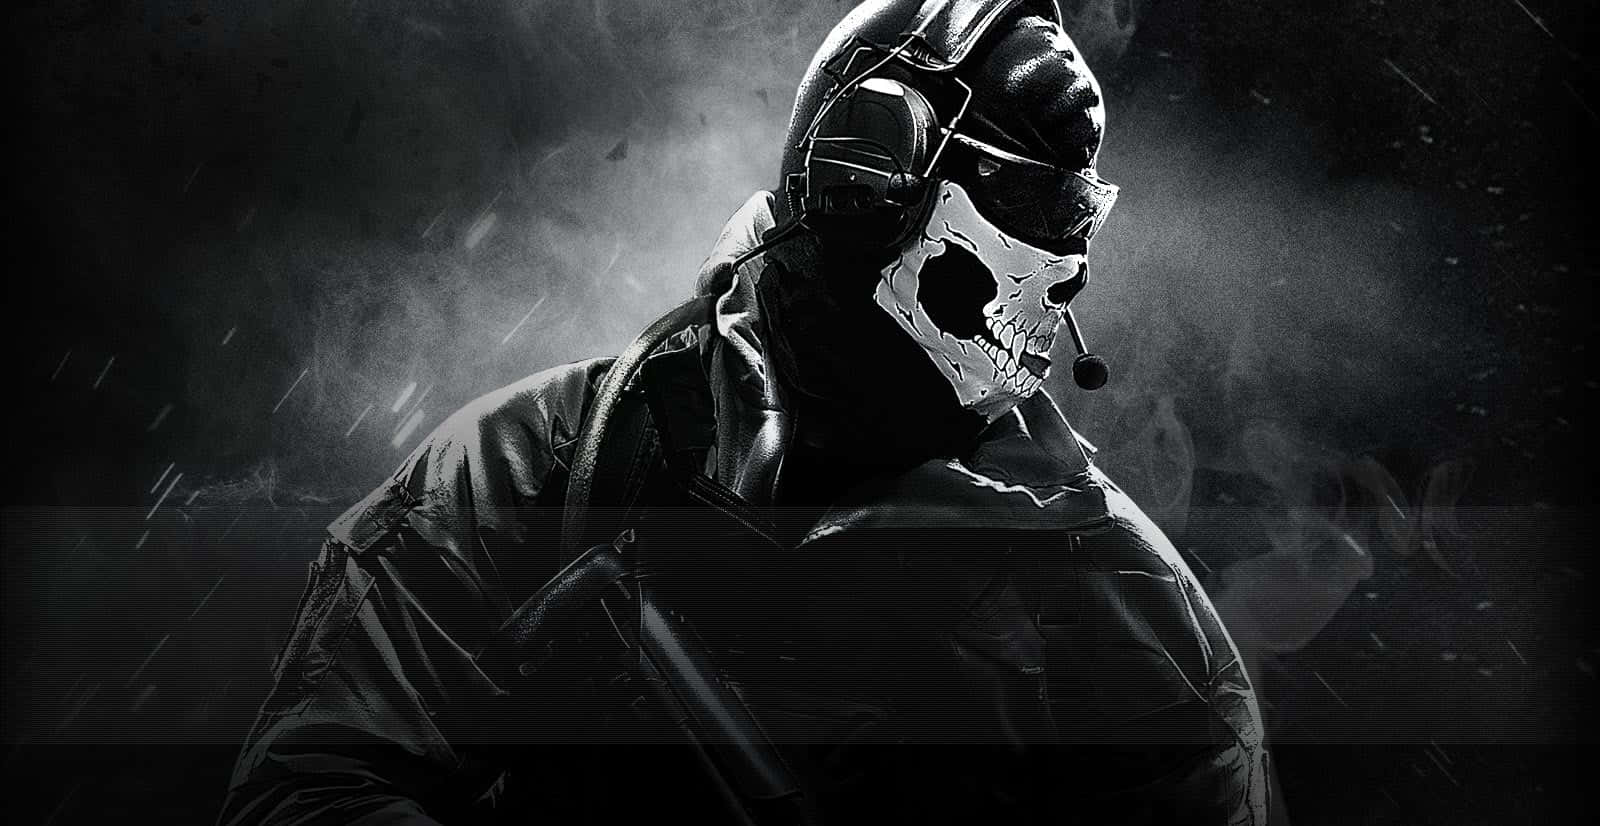 Intense Battlefield Action in Call of Duty: Ghosts Wallpaper